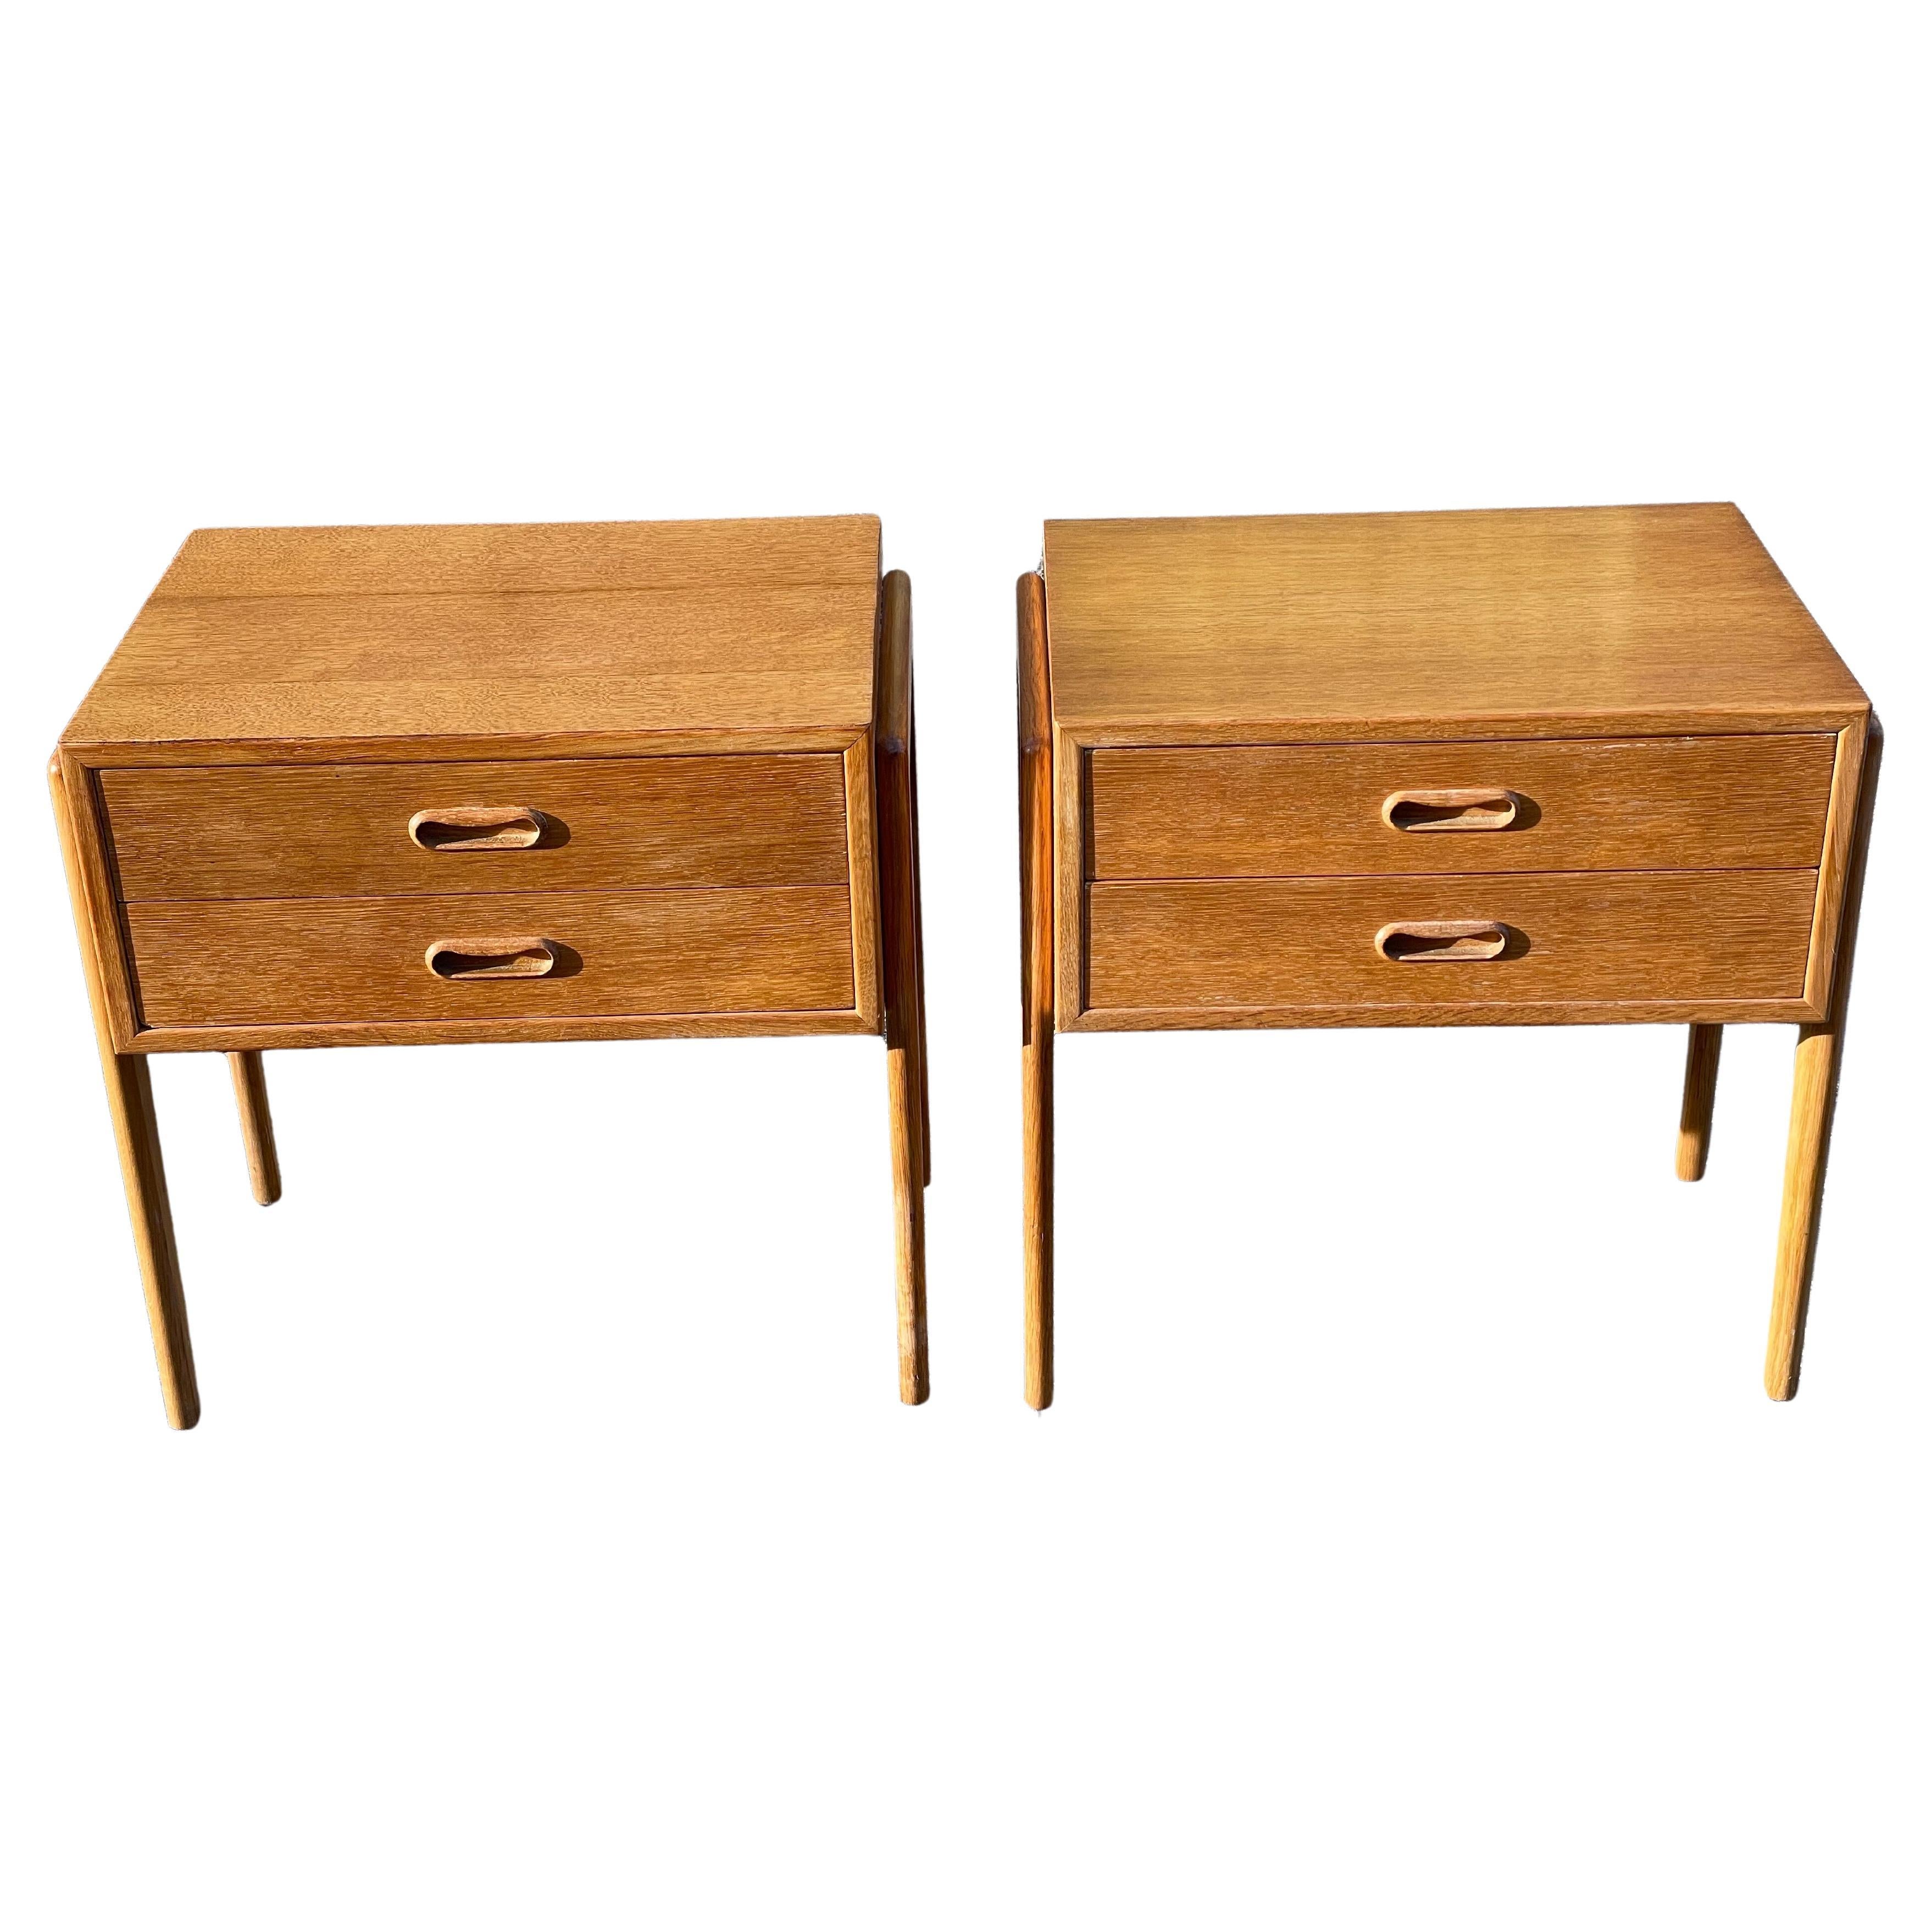 A timeless duo of Danish Mid-Century Modern nightstands in exquisite oak, boasting the signature craftsmanship of Ølholm Møbelfabrik from the iconic 1960s era. These nightstands seamlessly blend form and function with their two spacious drawers and